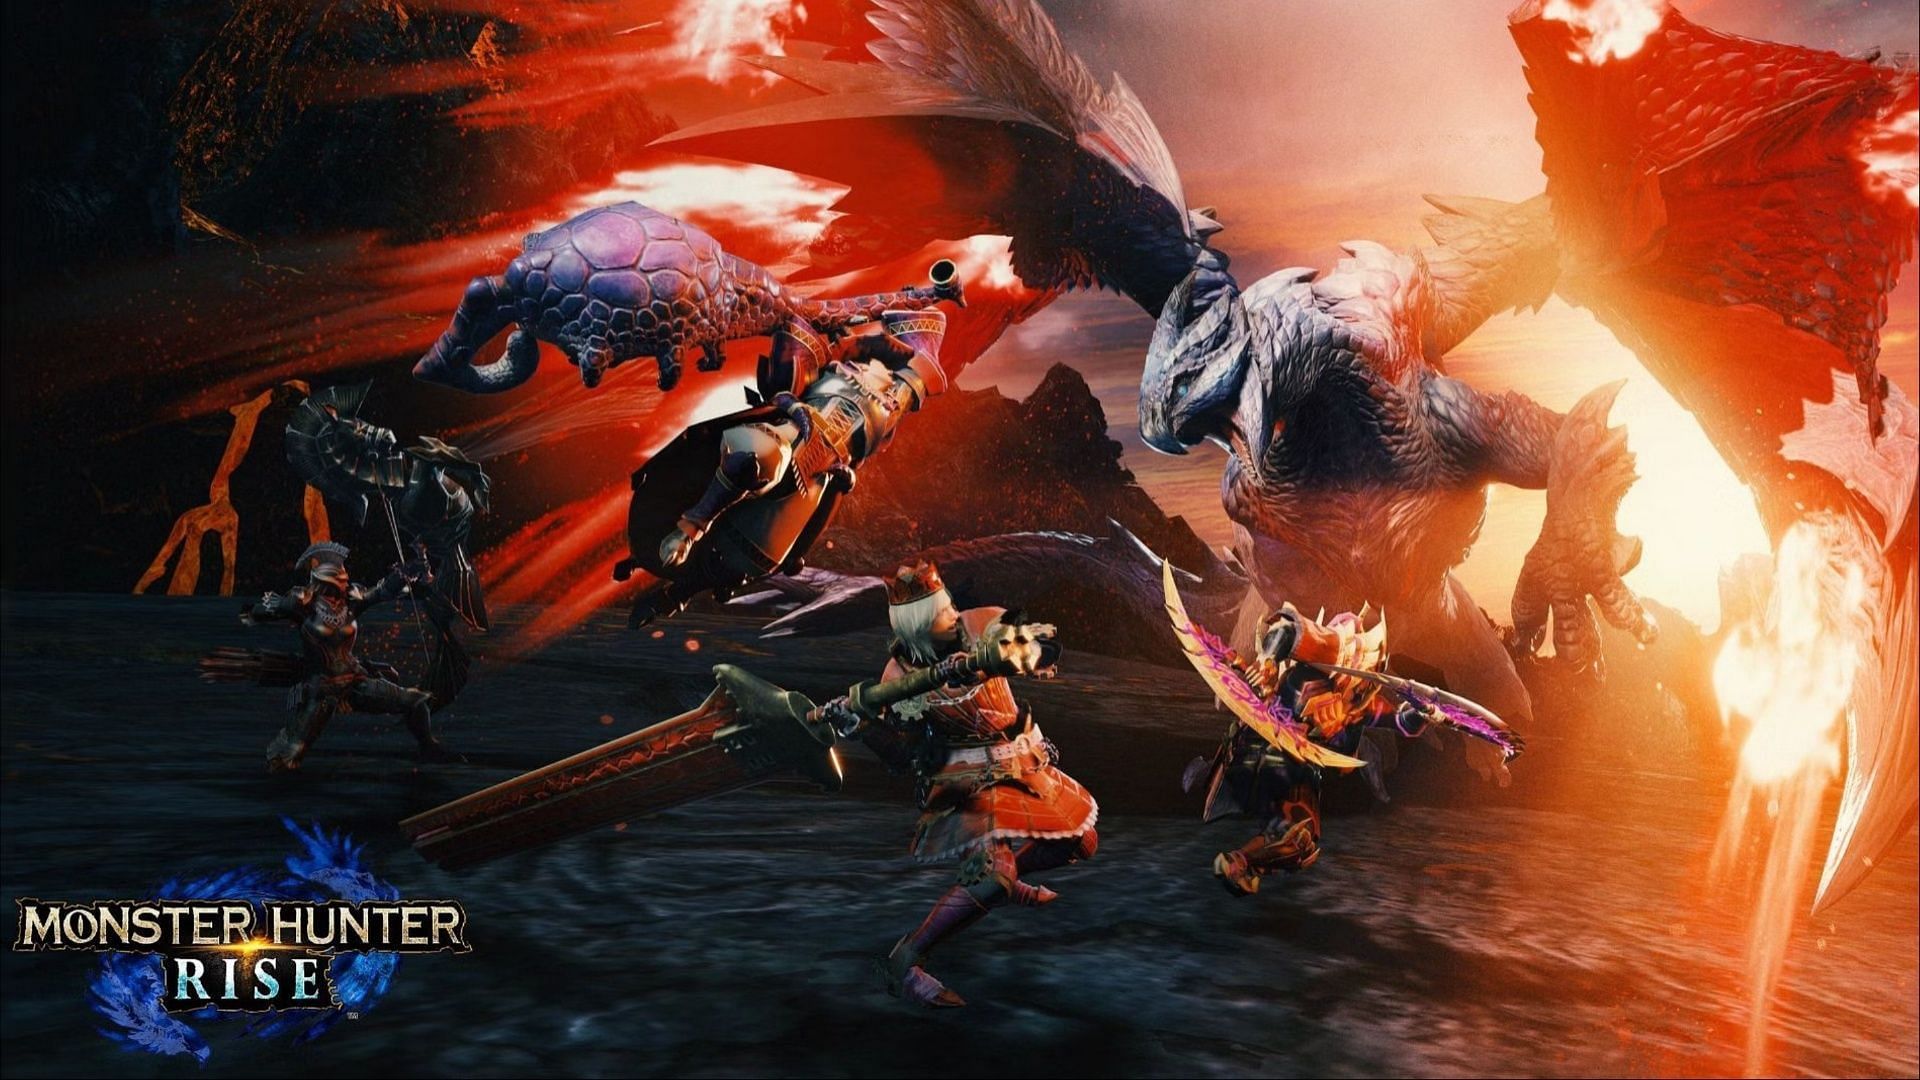 Monster Hunter Rise: Sunbreak features some of the fiercest Elder Dragons in the series (Image via Capcom)